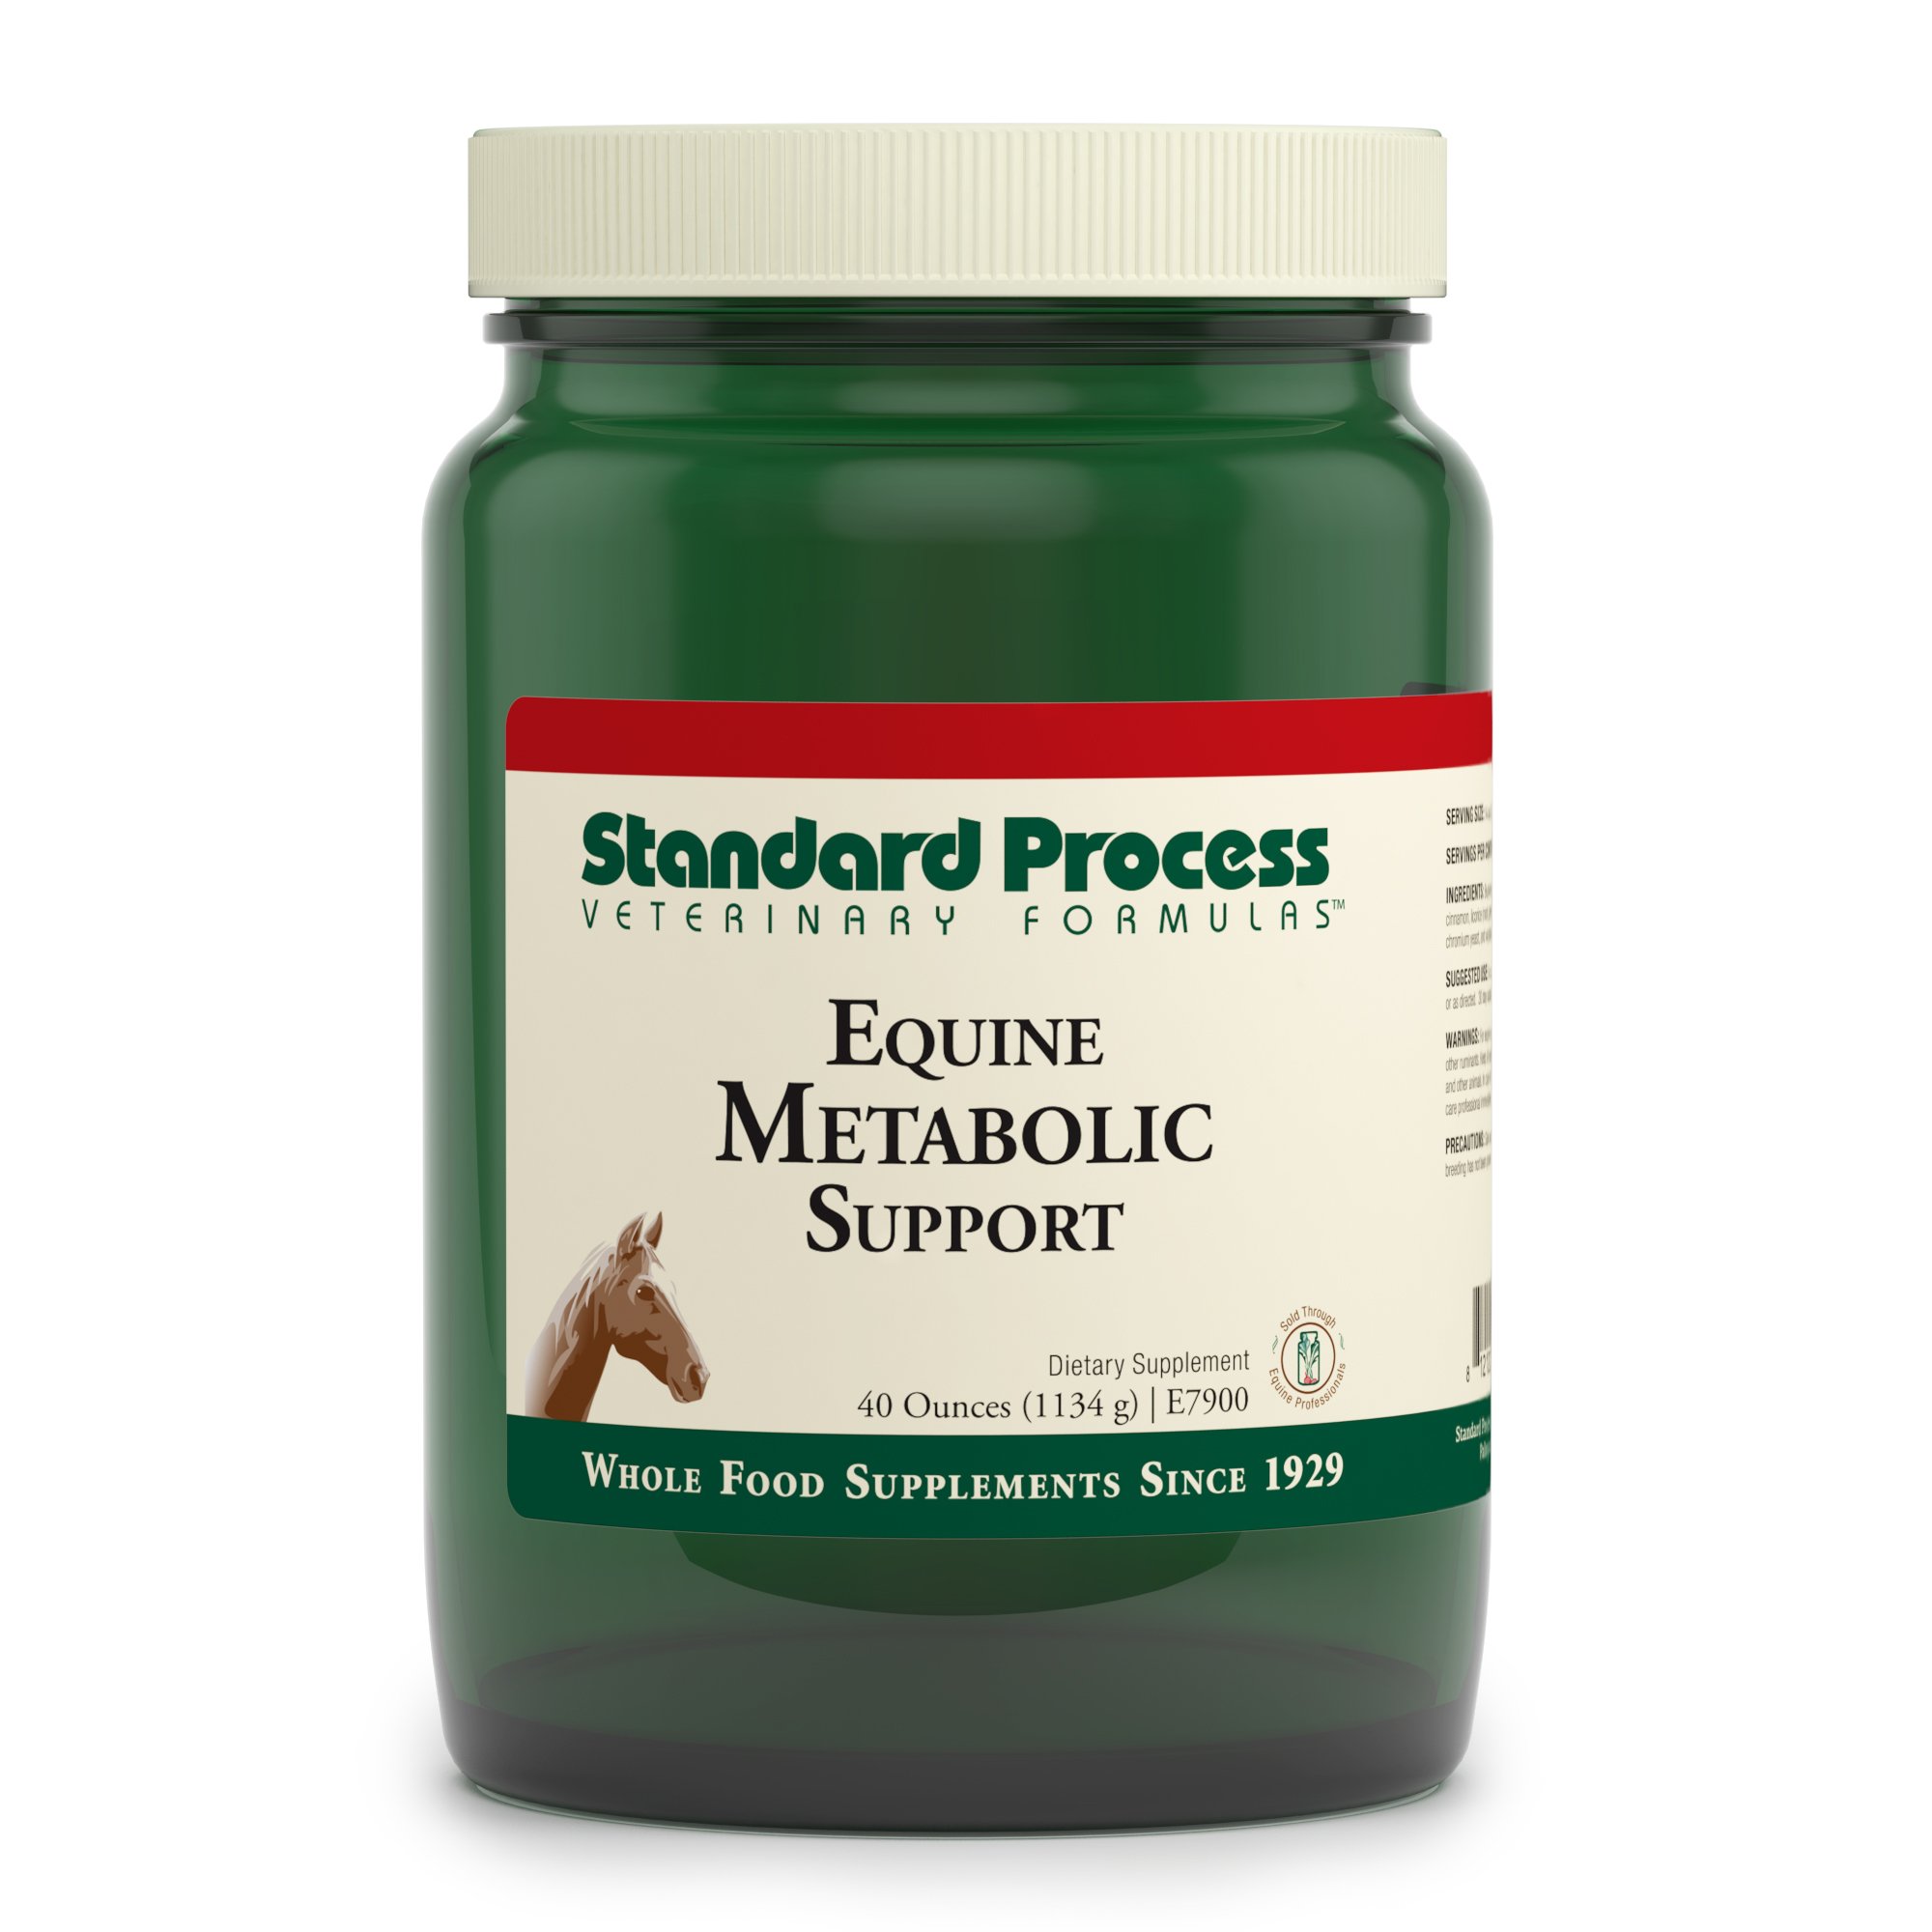 Standard Process Equine Metabolic Support - Whole Food Horse Supplies for Glucose Metabolism and Antioxidant Activity with Green Tea Extract, Cayen...